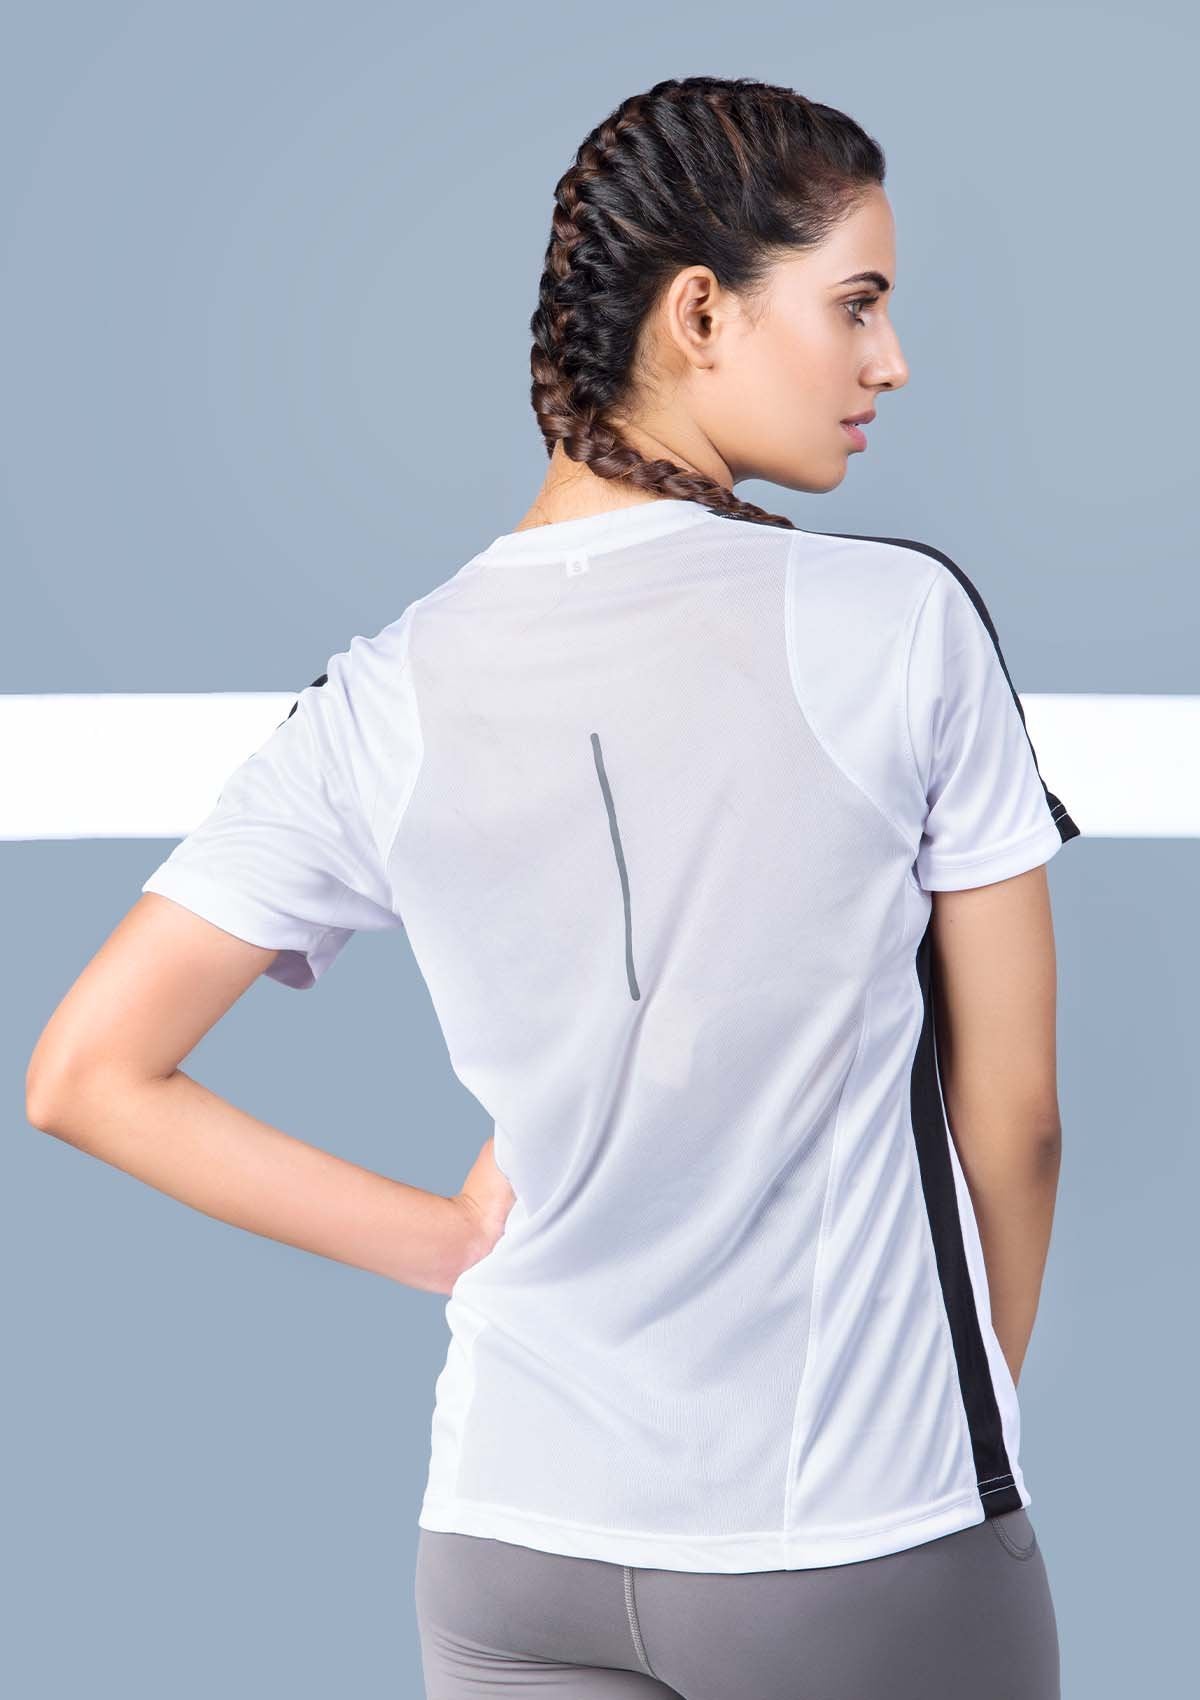 TRAINING TOP WITH WARP KNITTED BACK - WHITE - Nomad Apparel